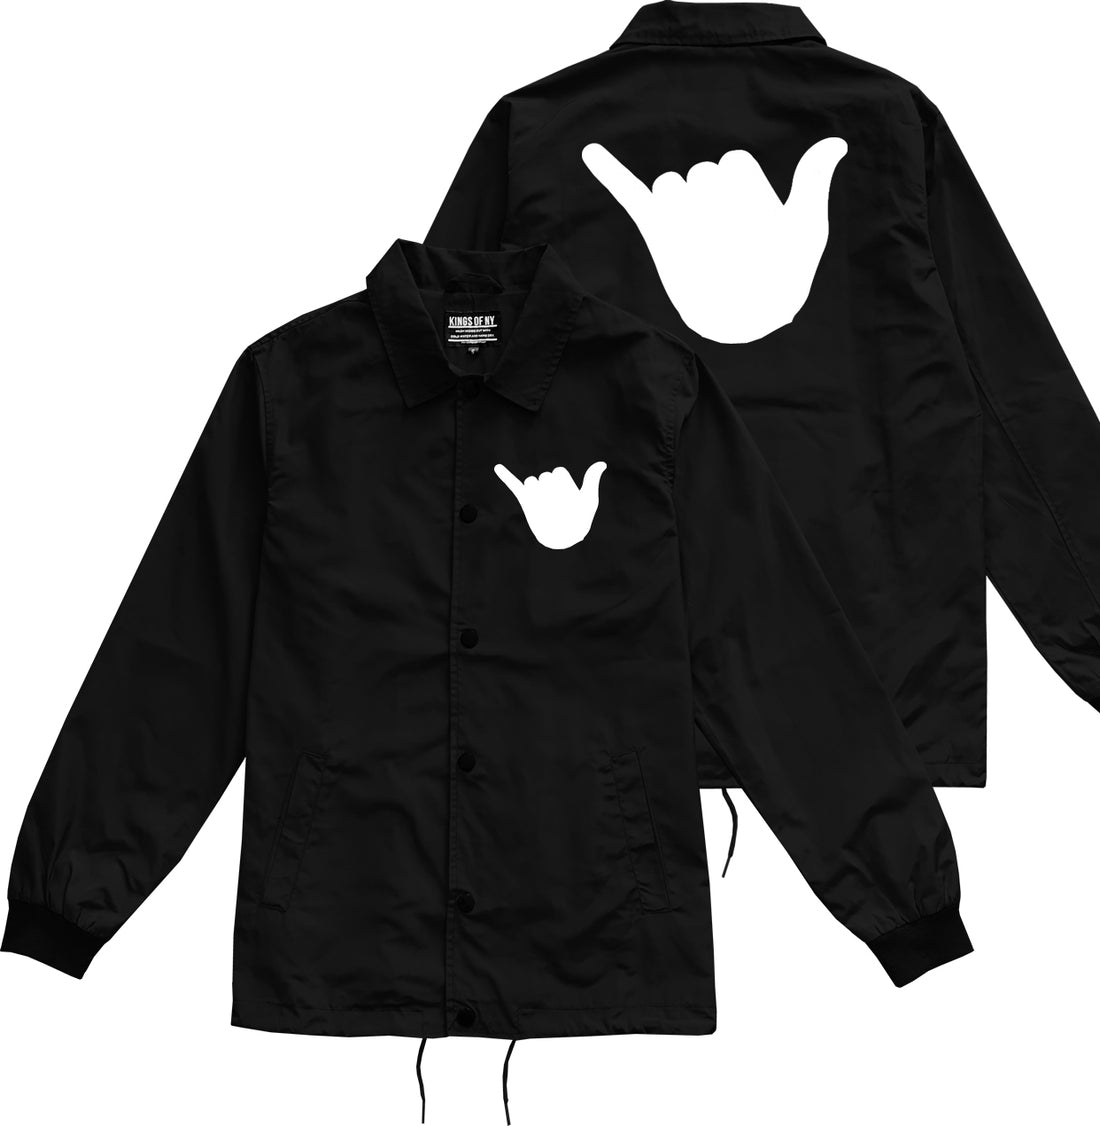 Rock On Hand Chest Black Coaches Jacket by Kings Of NY